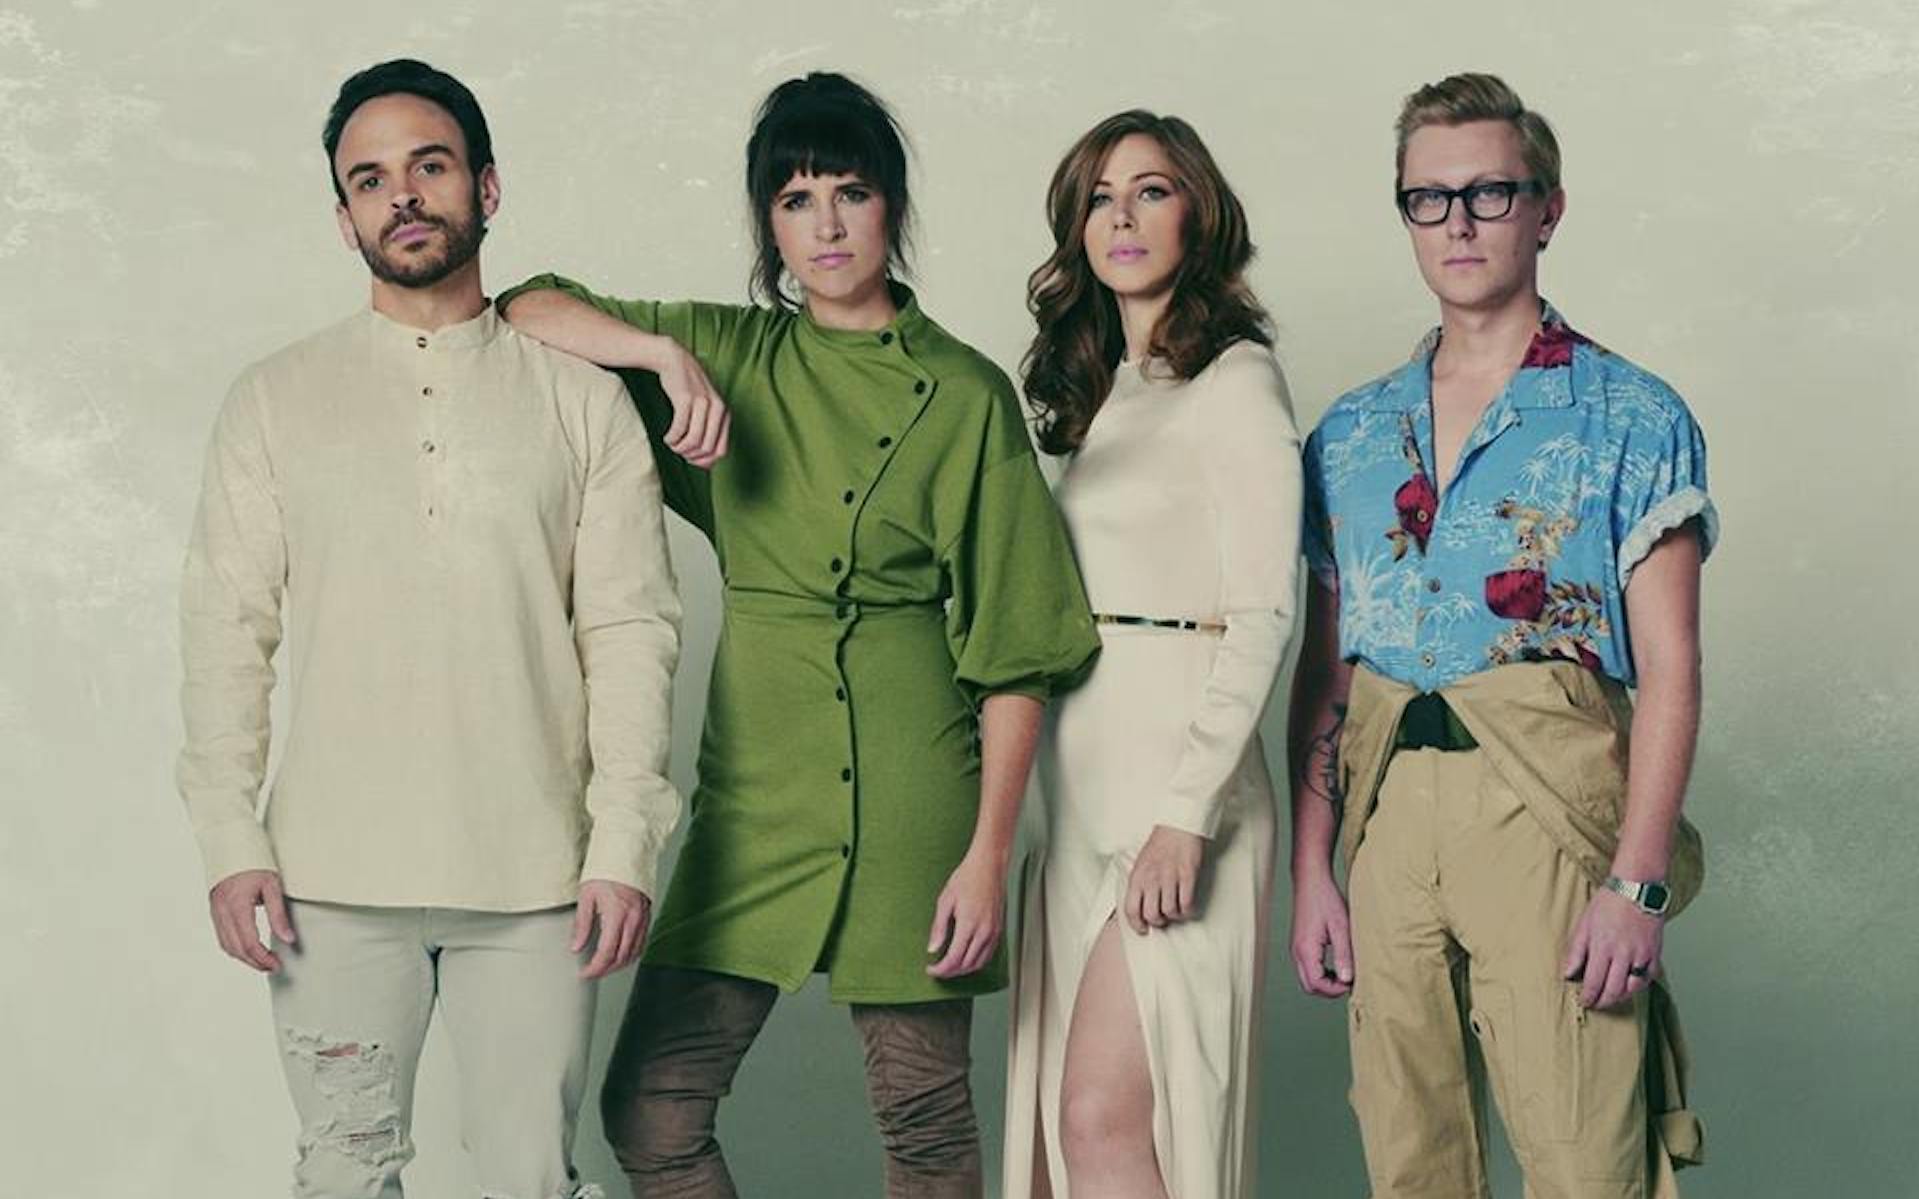 Lake Street Dive announce new album, single, and tour dates